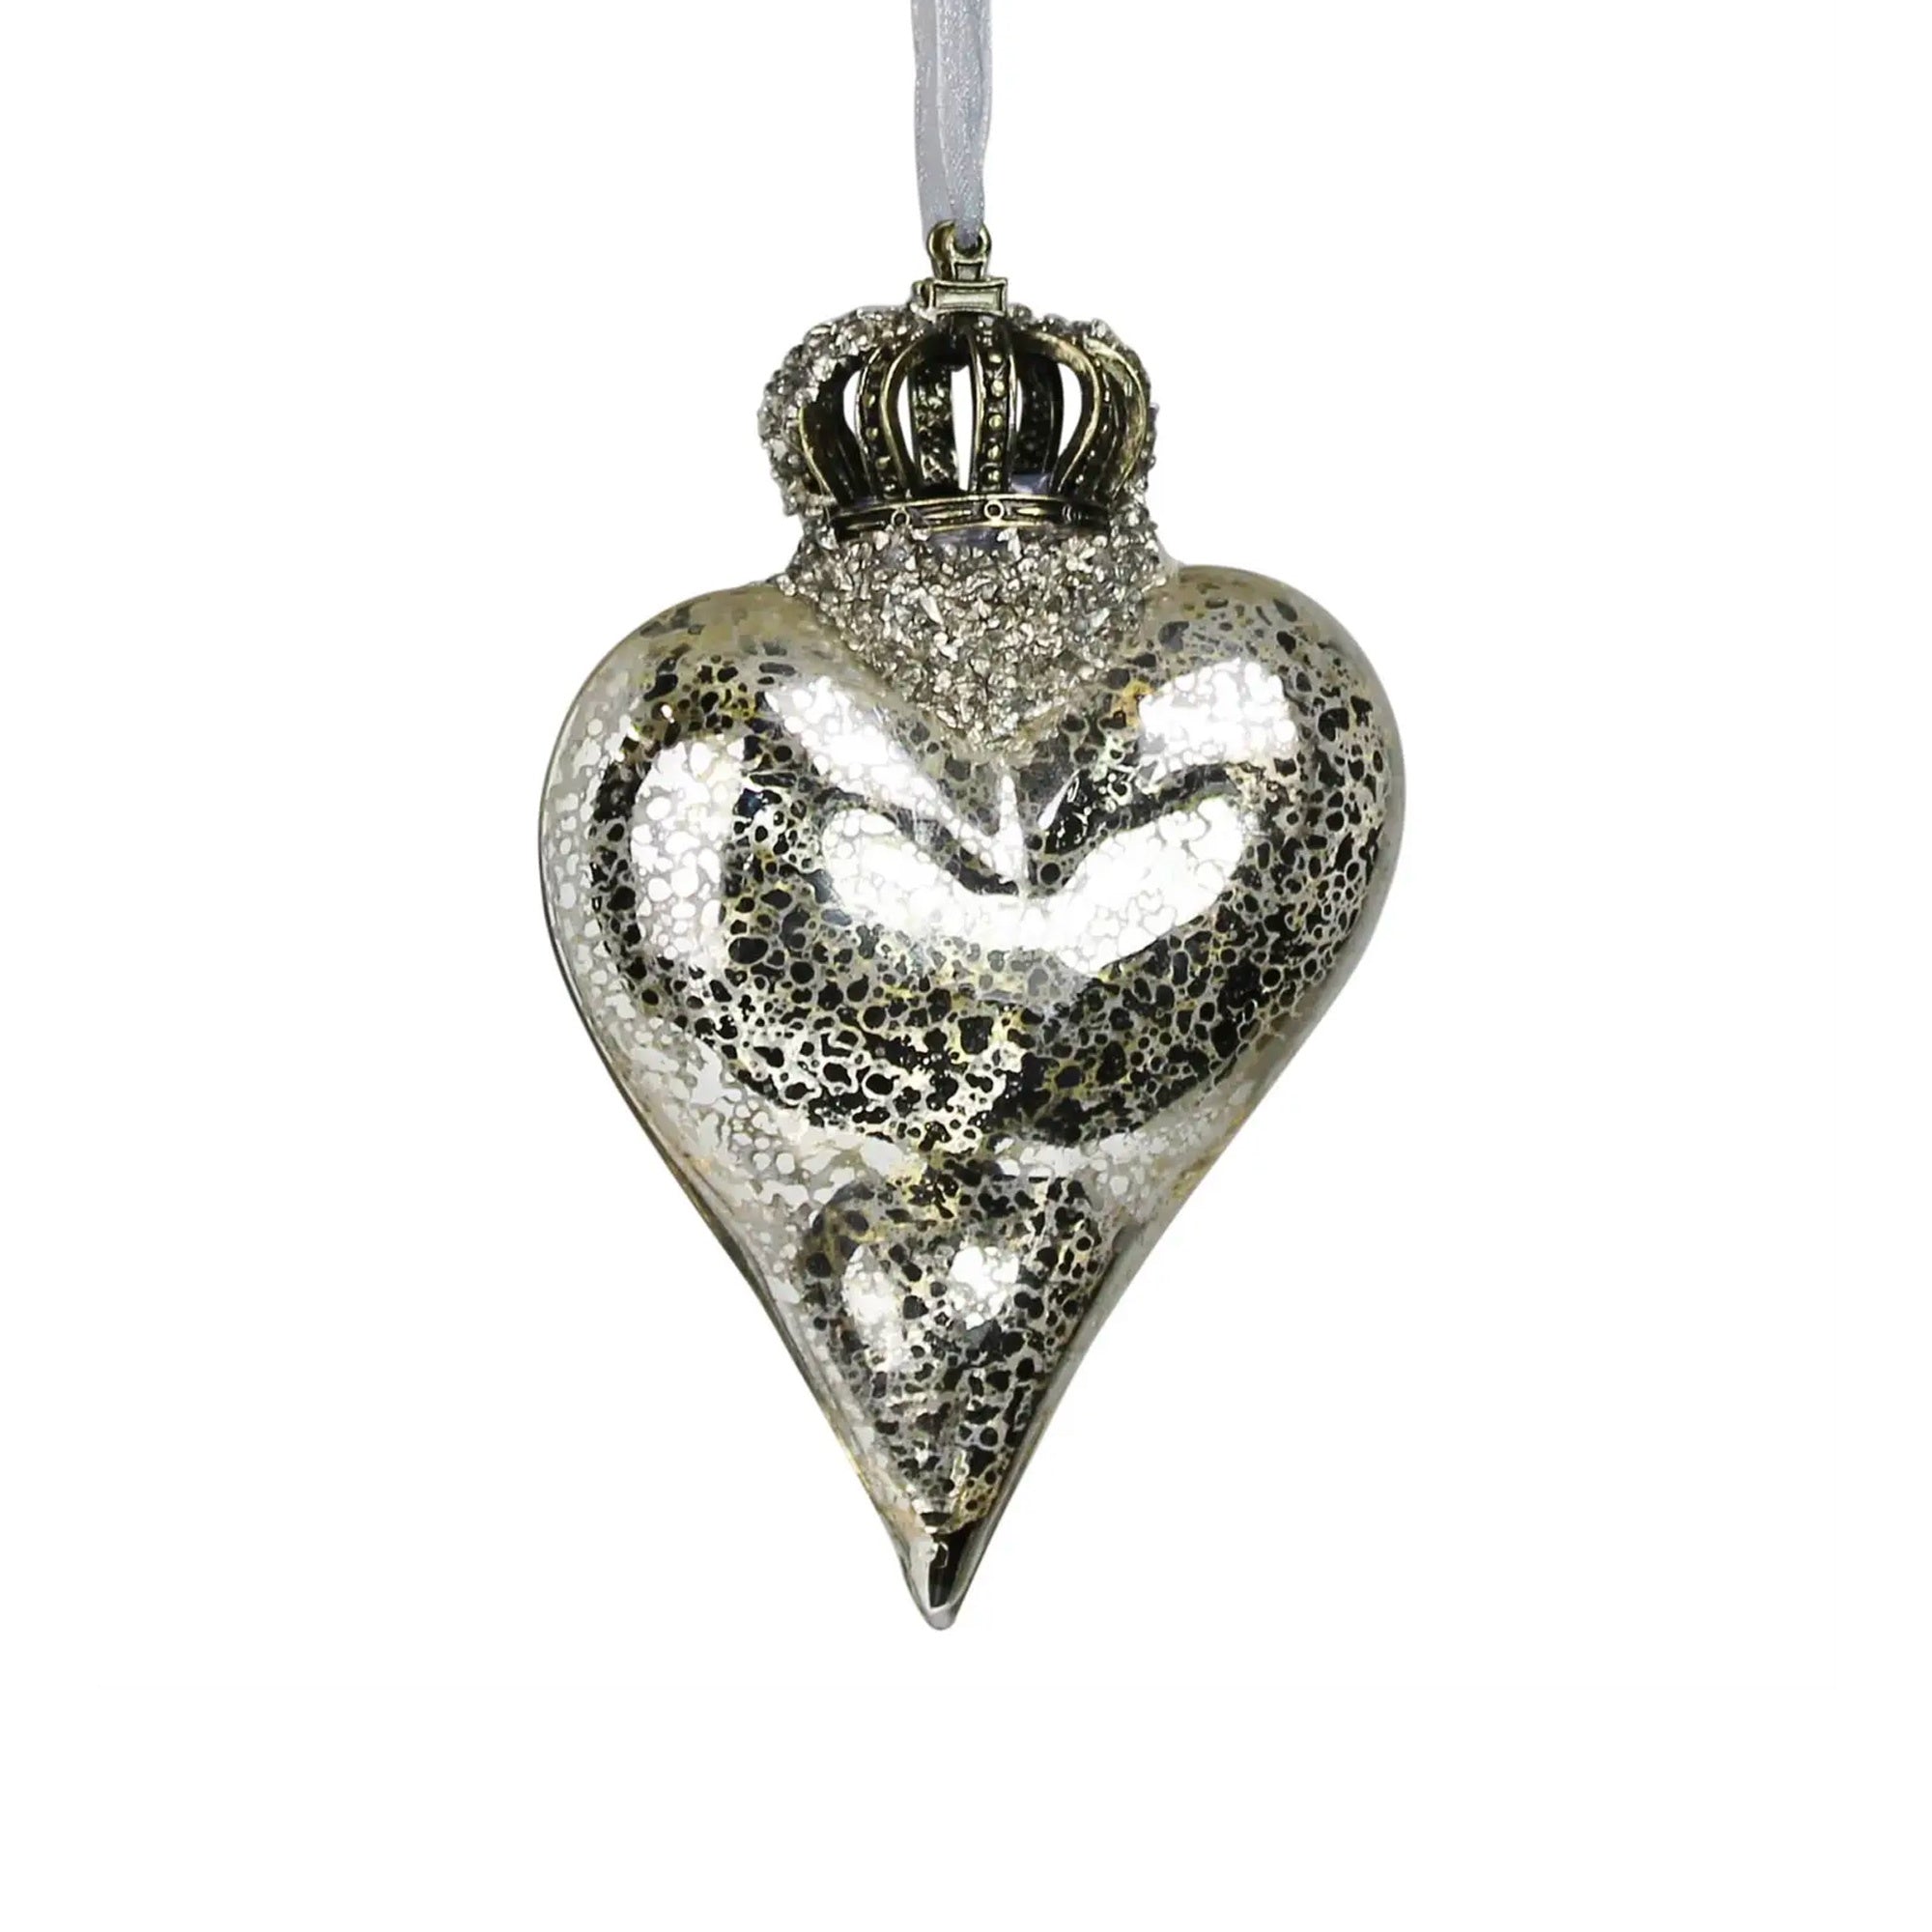 Silver Crowned Heart Ornament